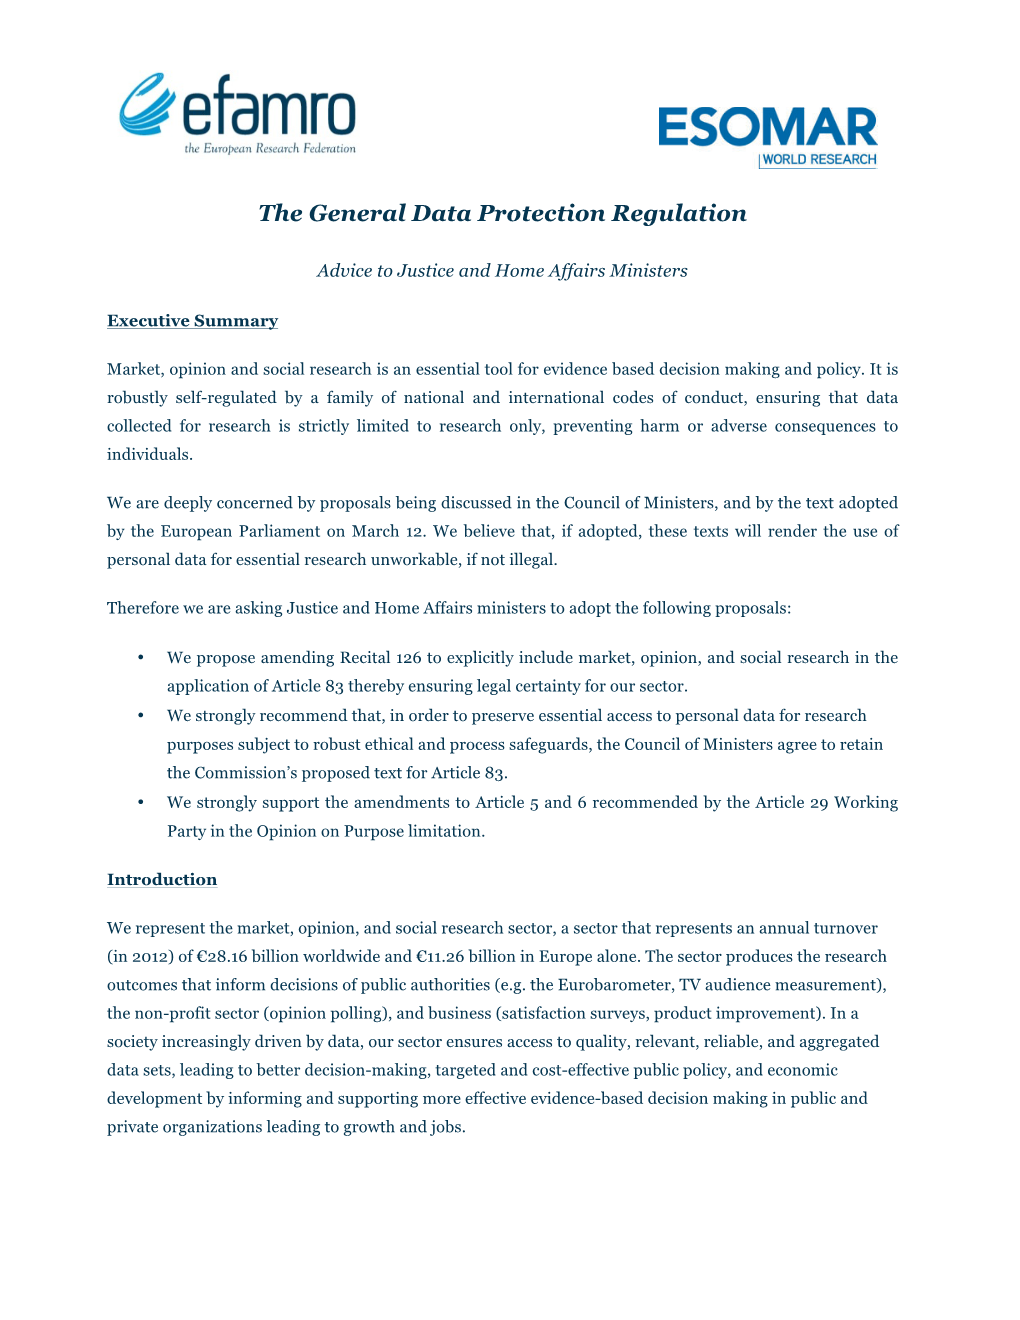 The General Data Protection Regulation